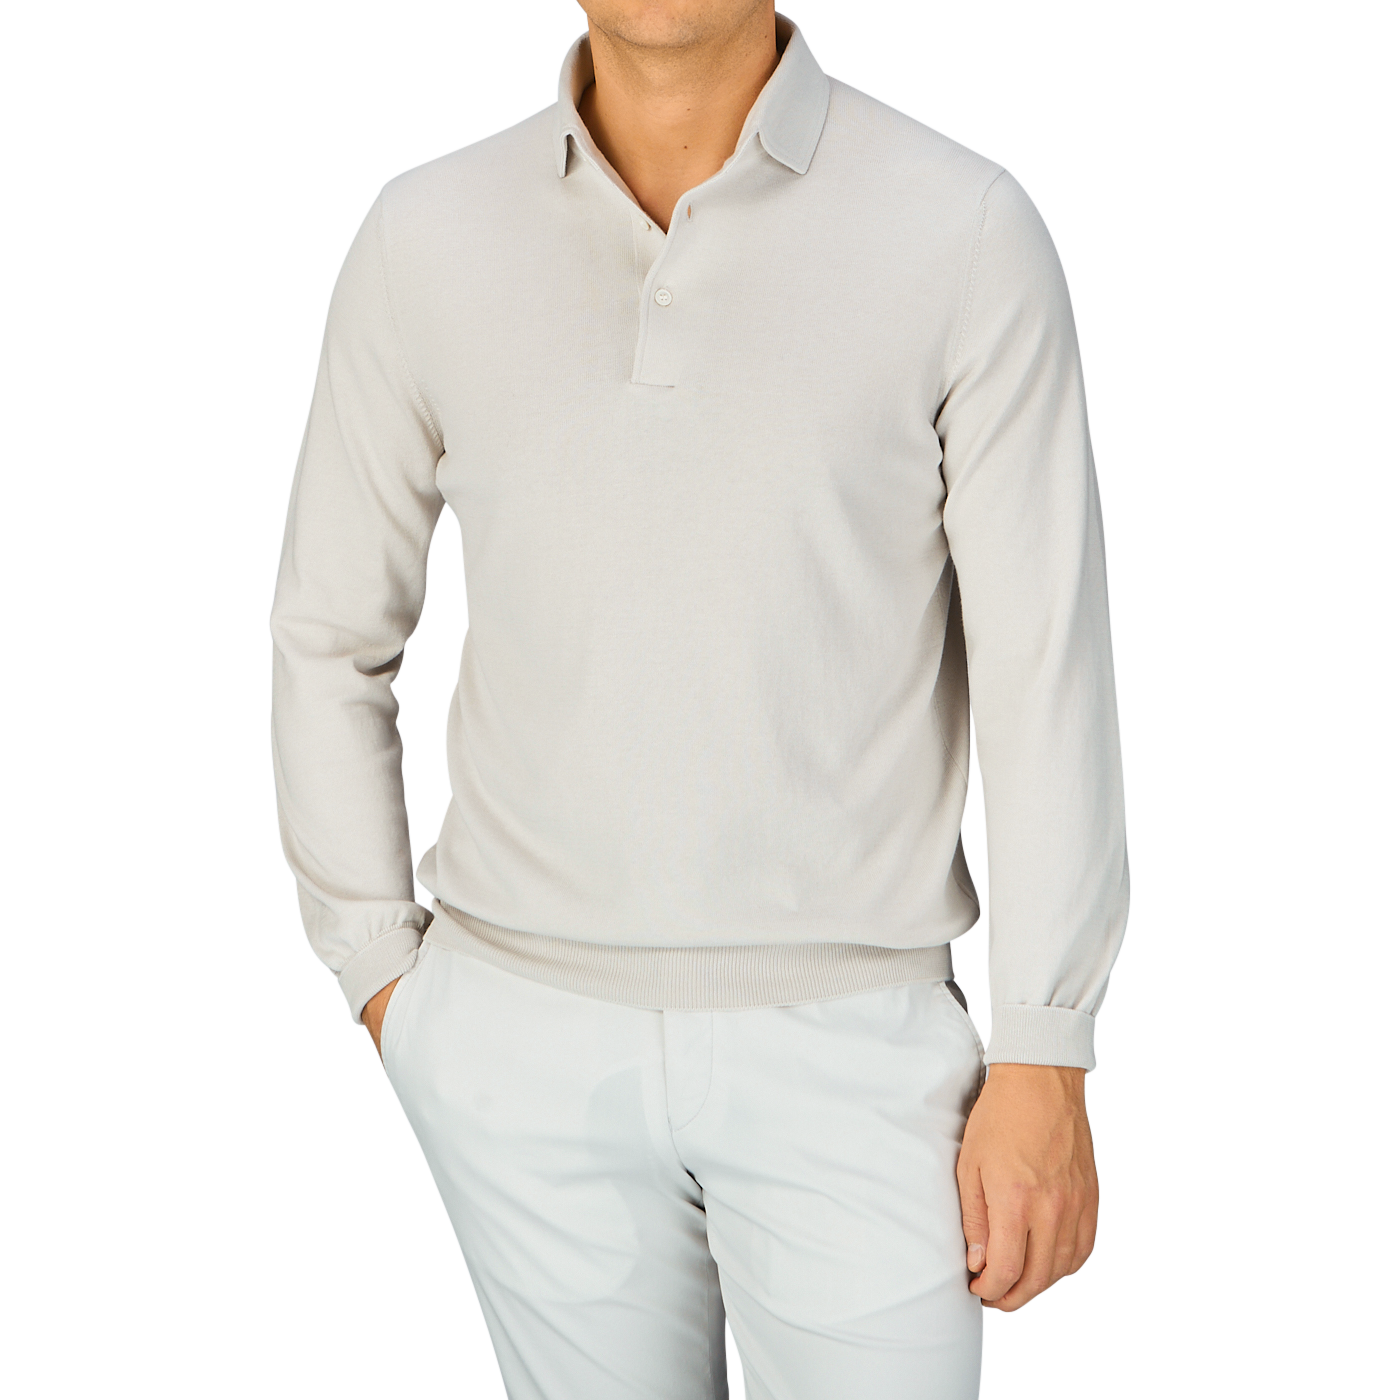 Man wearing a Taupe Beige Organic Cotton LS Polo Shirt by Gran Sasso and white pants against a blue background.